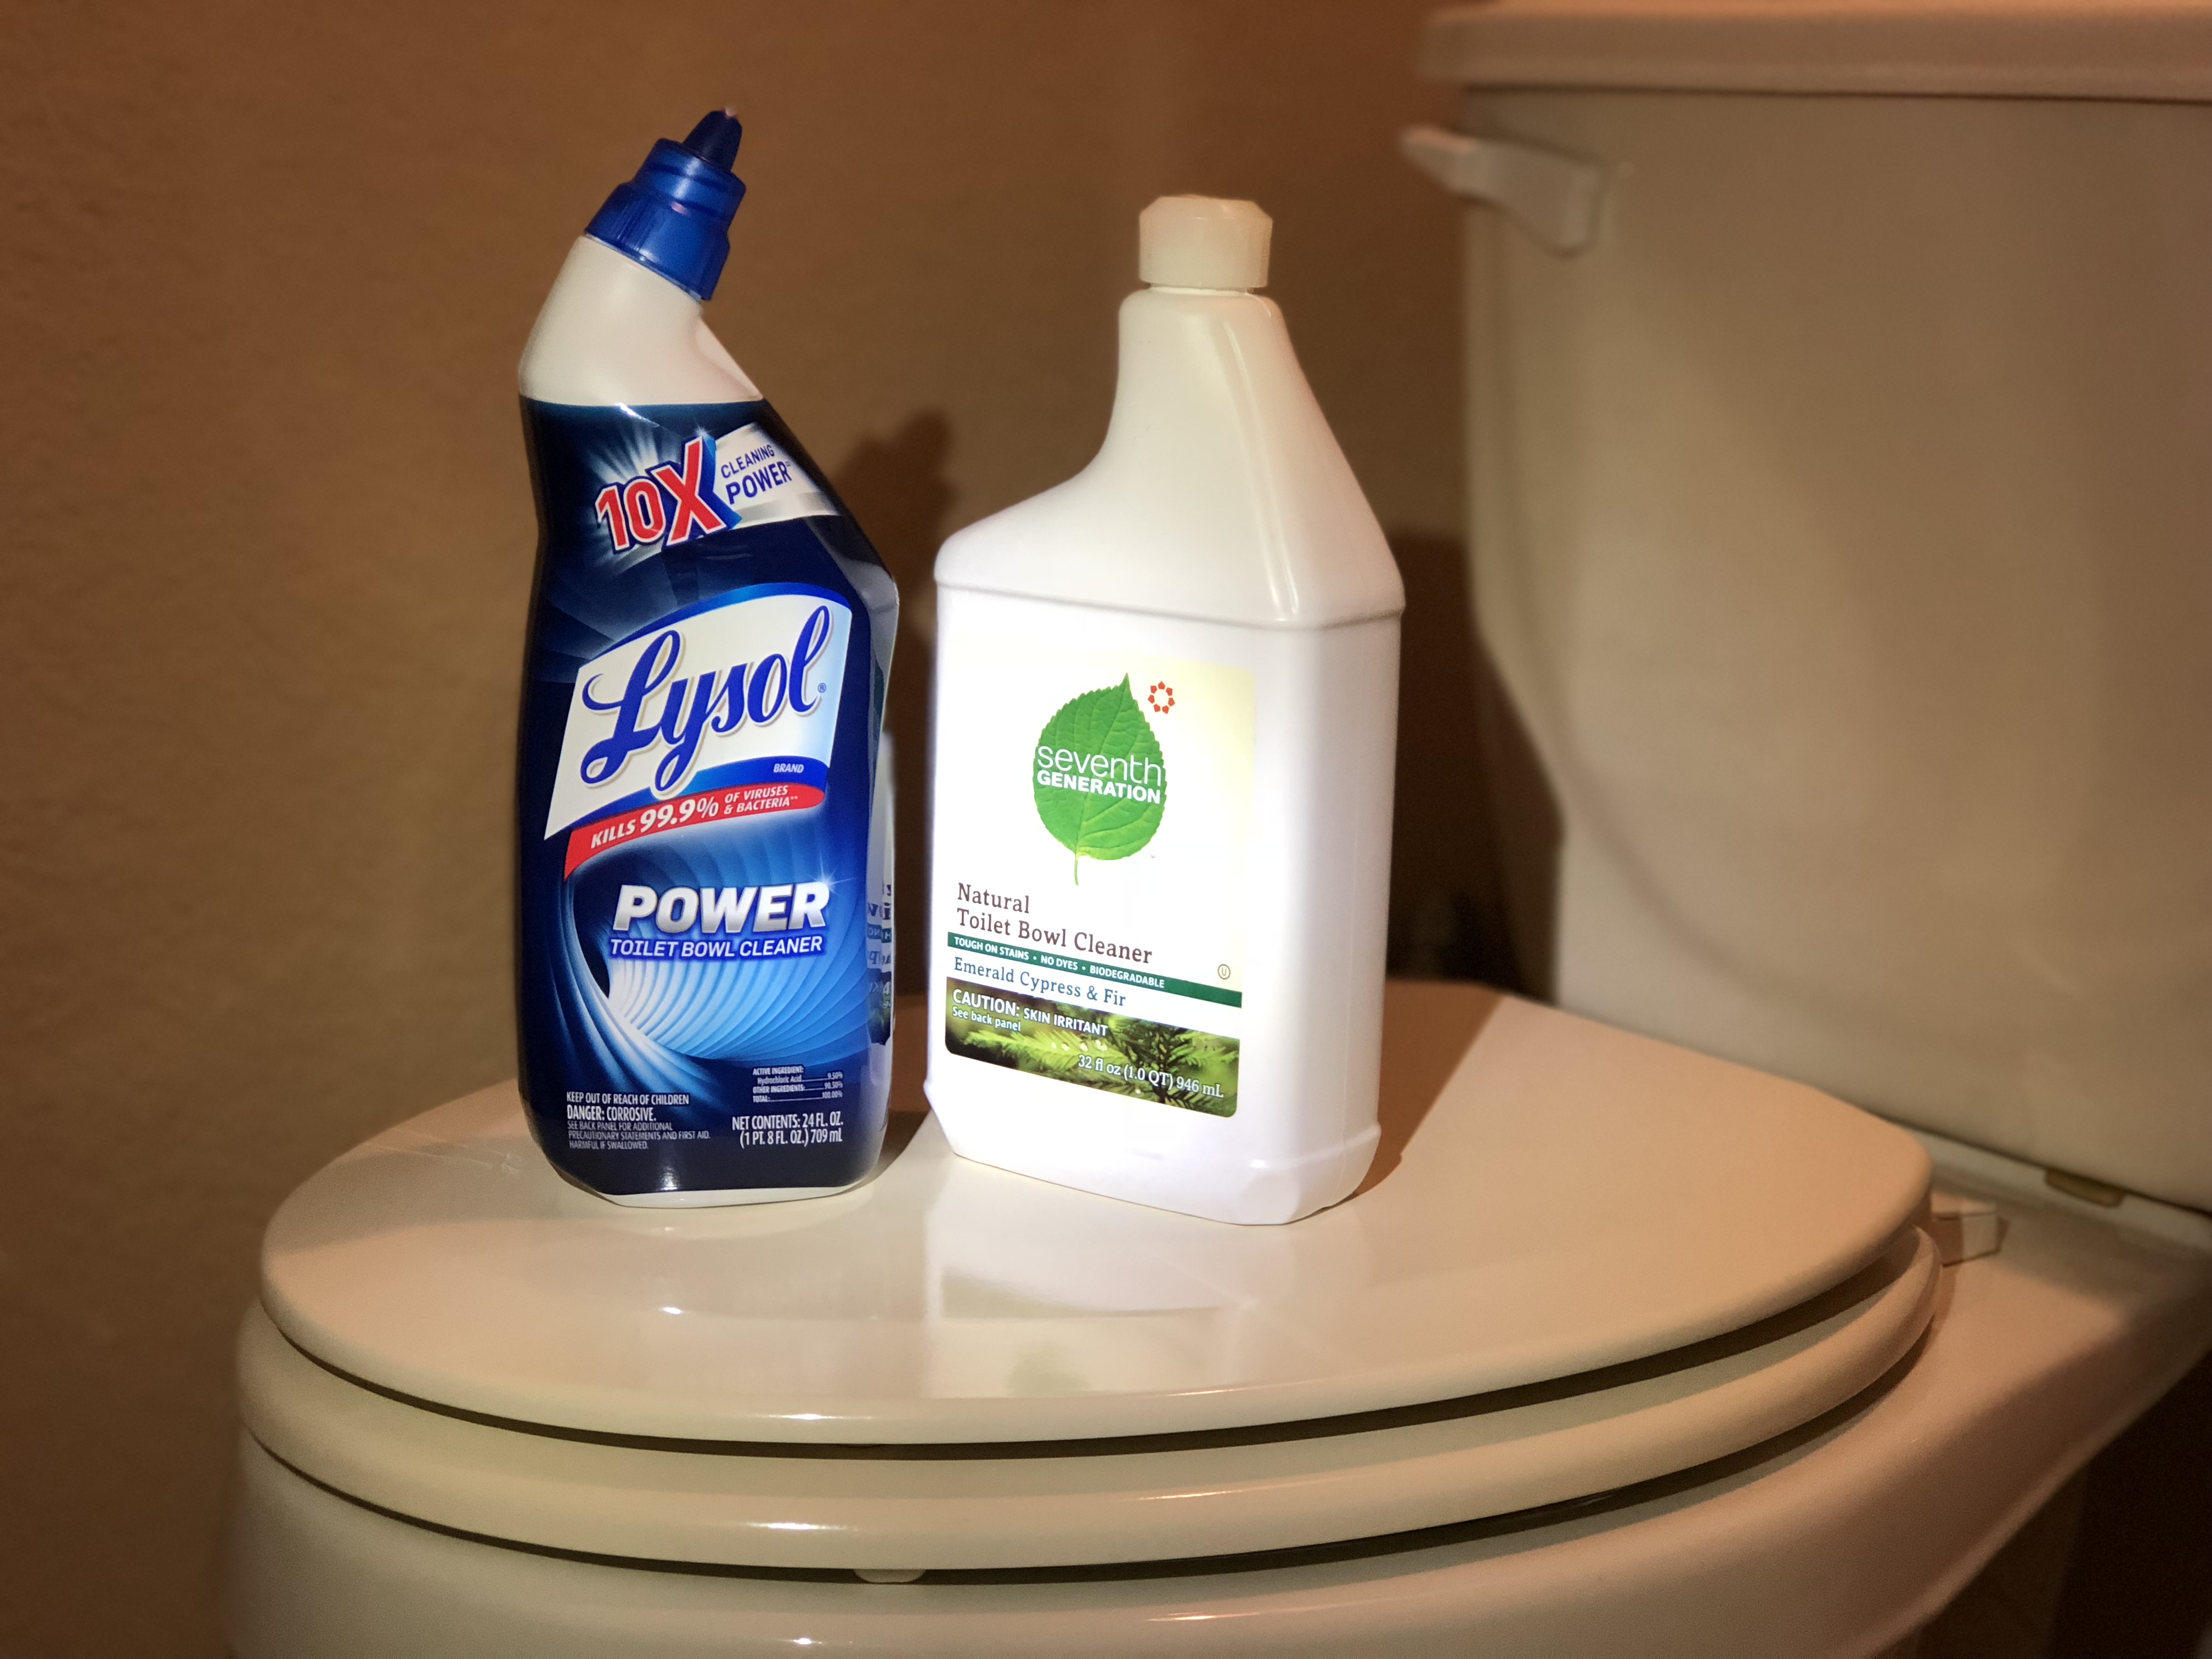 green natural eco-friendly cleaning products – Toilet Bowl Cleaners – Lysol versus Seventh Generation